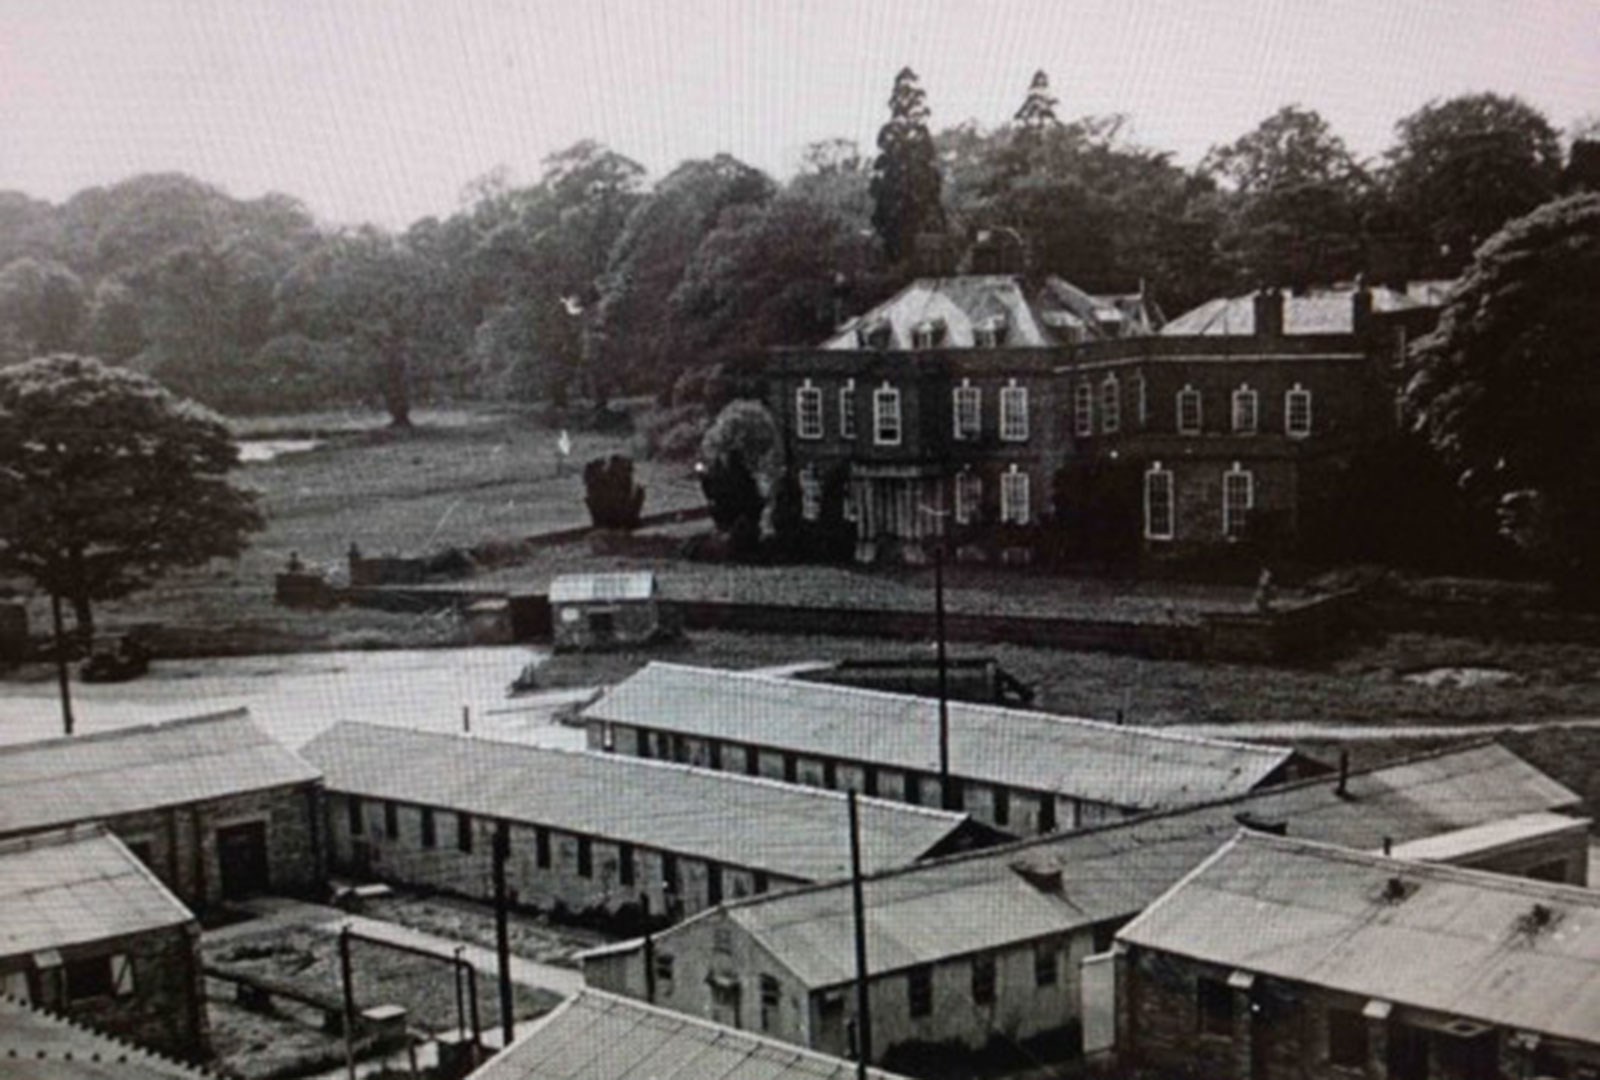 A view of temporary army barracks in the foreground of landscaped gardens with a grand country house in the background